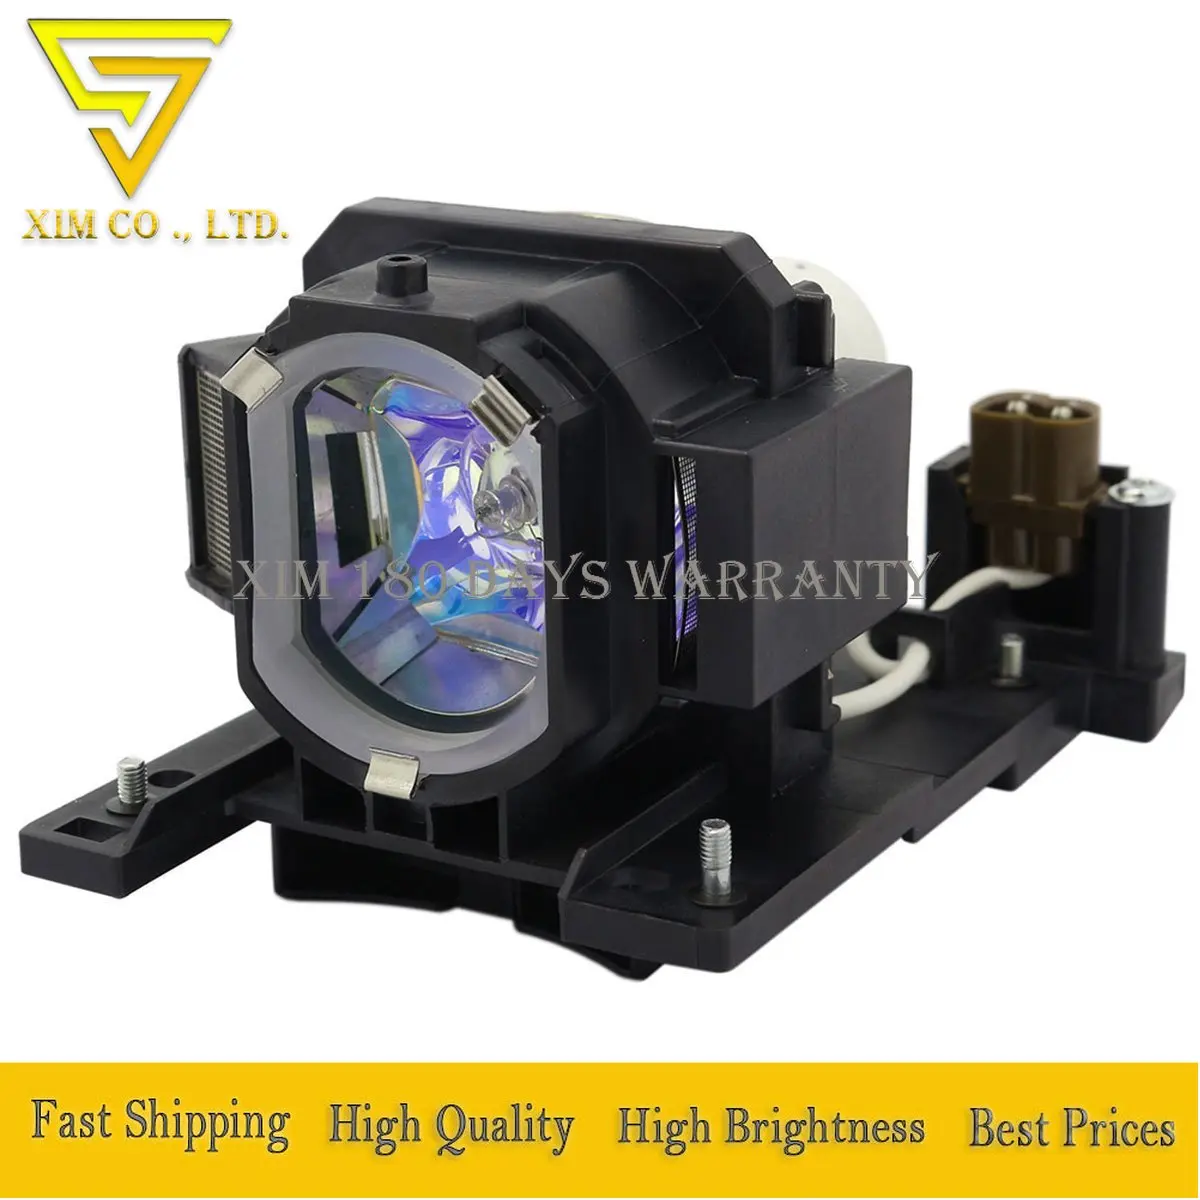 high quality DT01022 DT01026 Replacement Lamp with Housing for Hitachi CP-RX80W CP-RX78 ED-X24 CP-RX78W CP-RX80 projectors compatible dt01091 for hitachi cp aw100n cpd10 cp dw10 ed aw100n ed aw110n projector lamp bulb